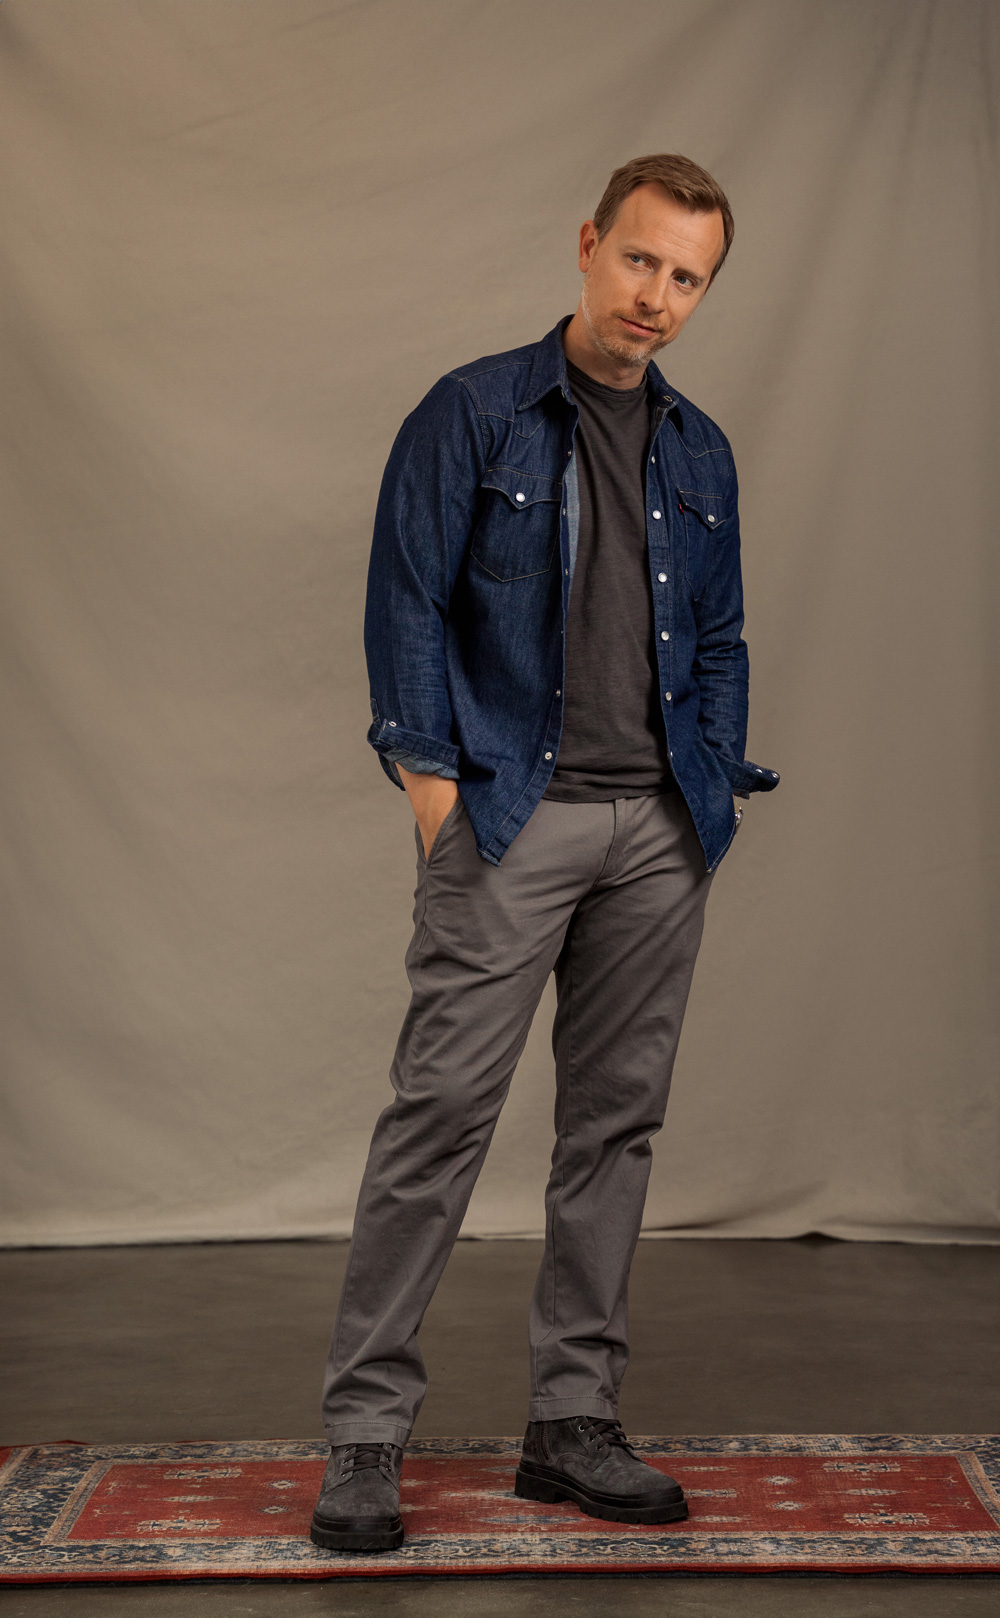 A man wears a dark grey t-shirt under an unbuttoned dark blue denim shirt  and chest pockets over a black pocket t-shirt. His outfit is completed with grey trousers and dark grey suede boots. He has short blonde hair, and he poses with one hand in his pocket.